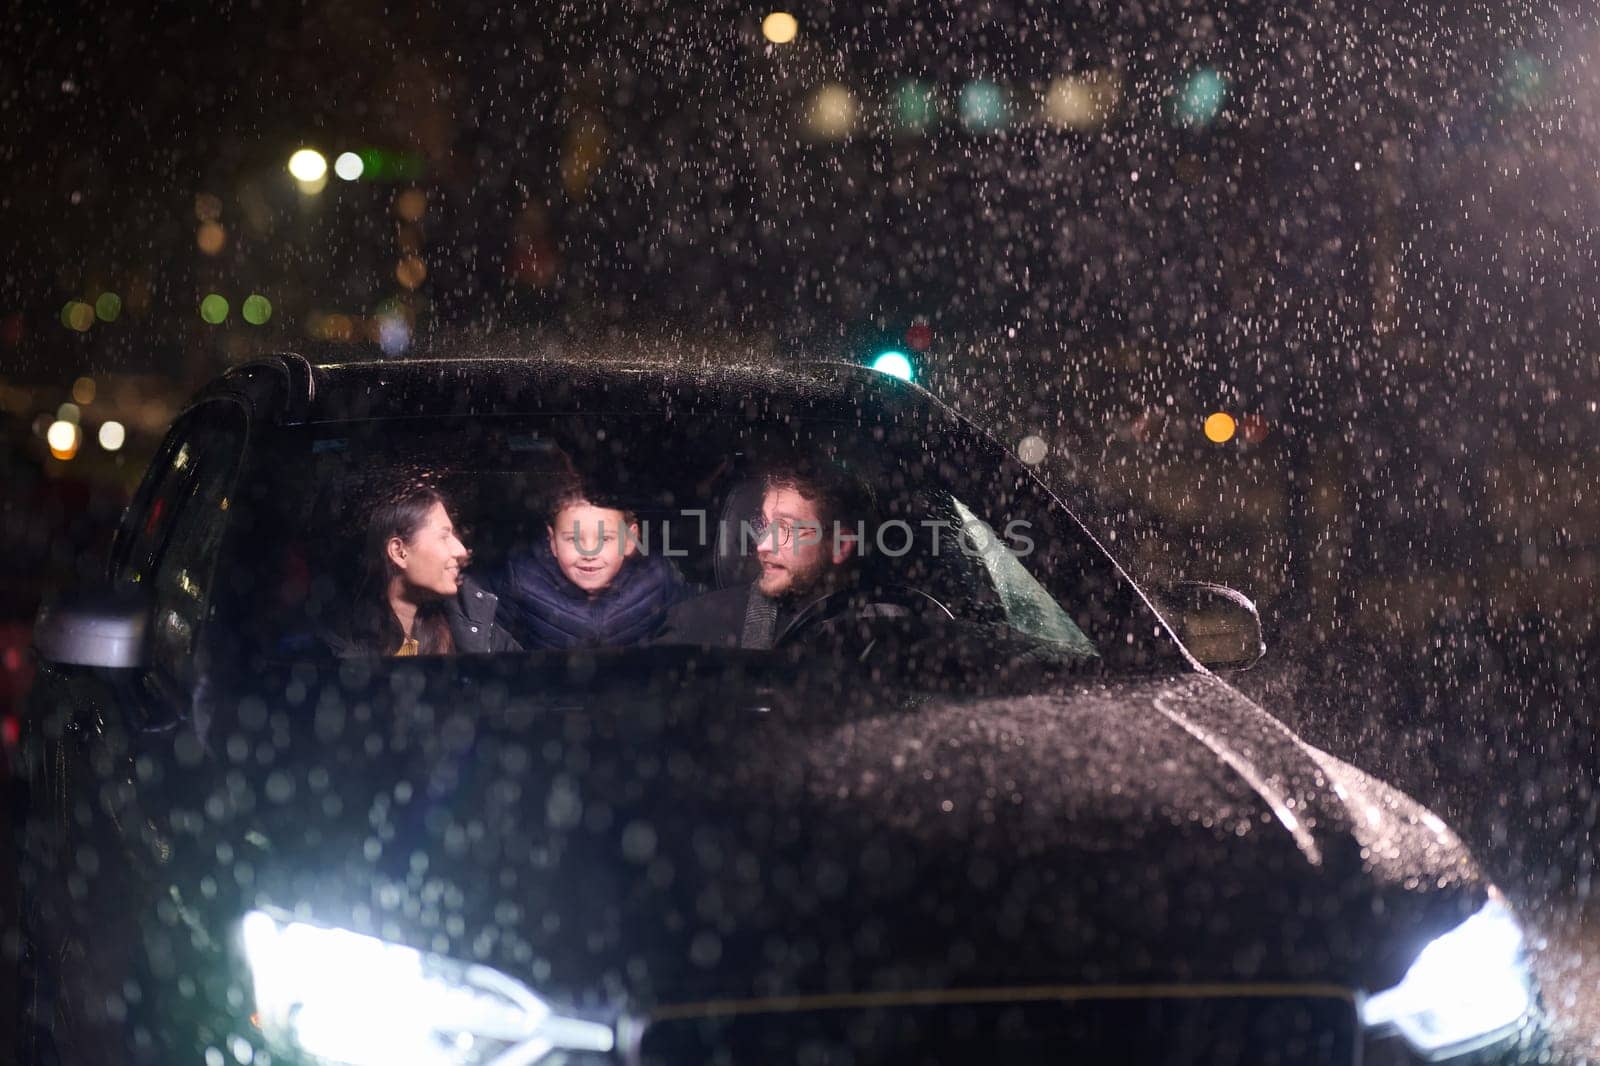 In the midst of a nighttime journey, a happy family enjoys playful moments inside a car as they travel through rainy weather, illuminated by the glow of headlights, laughter, and bonding by dotshock